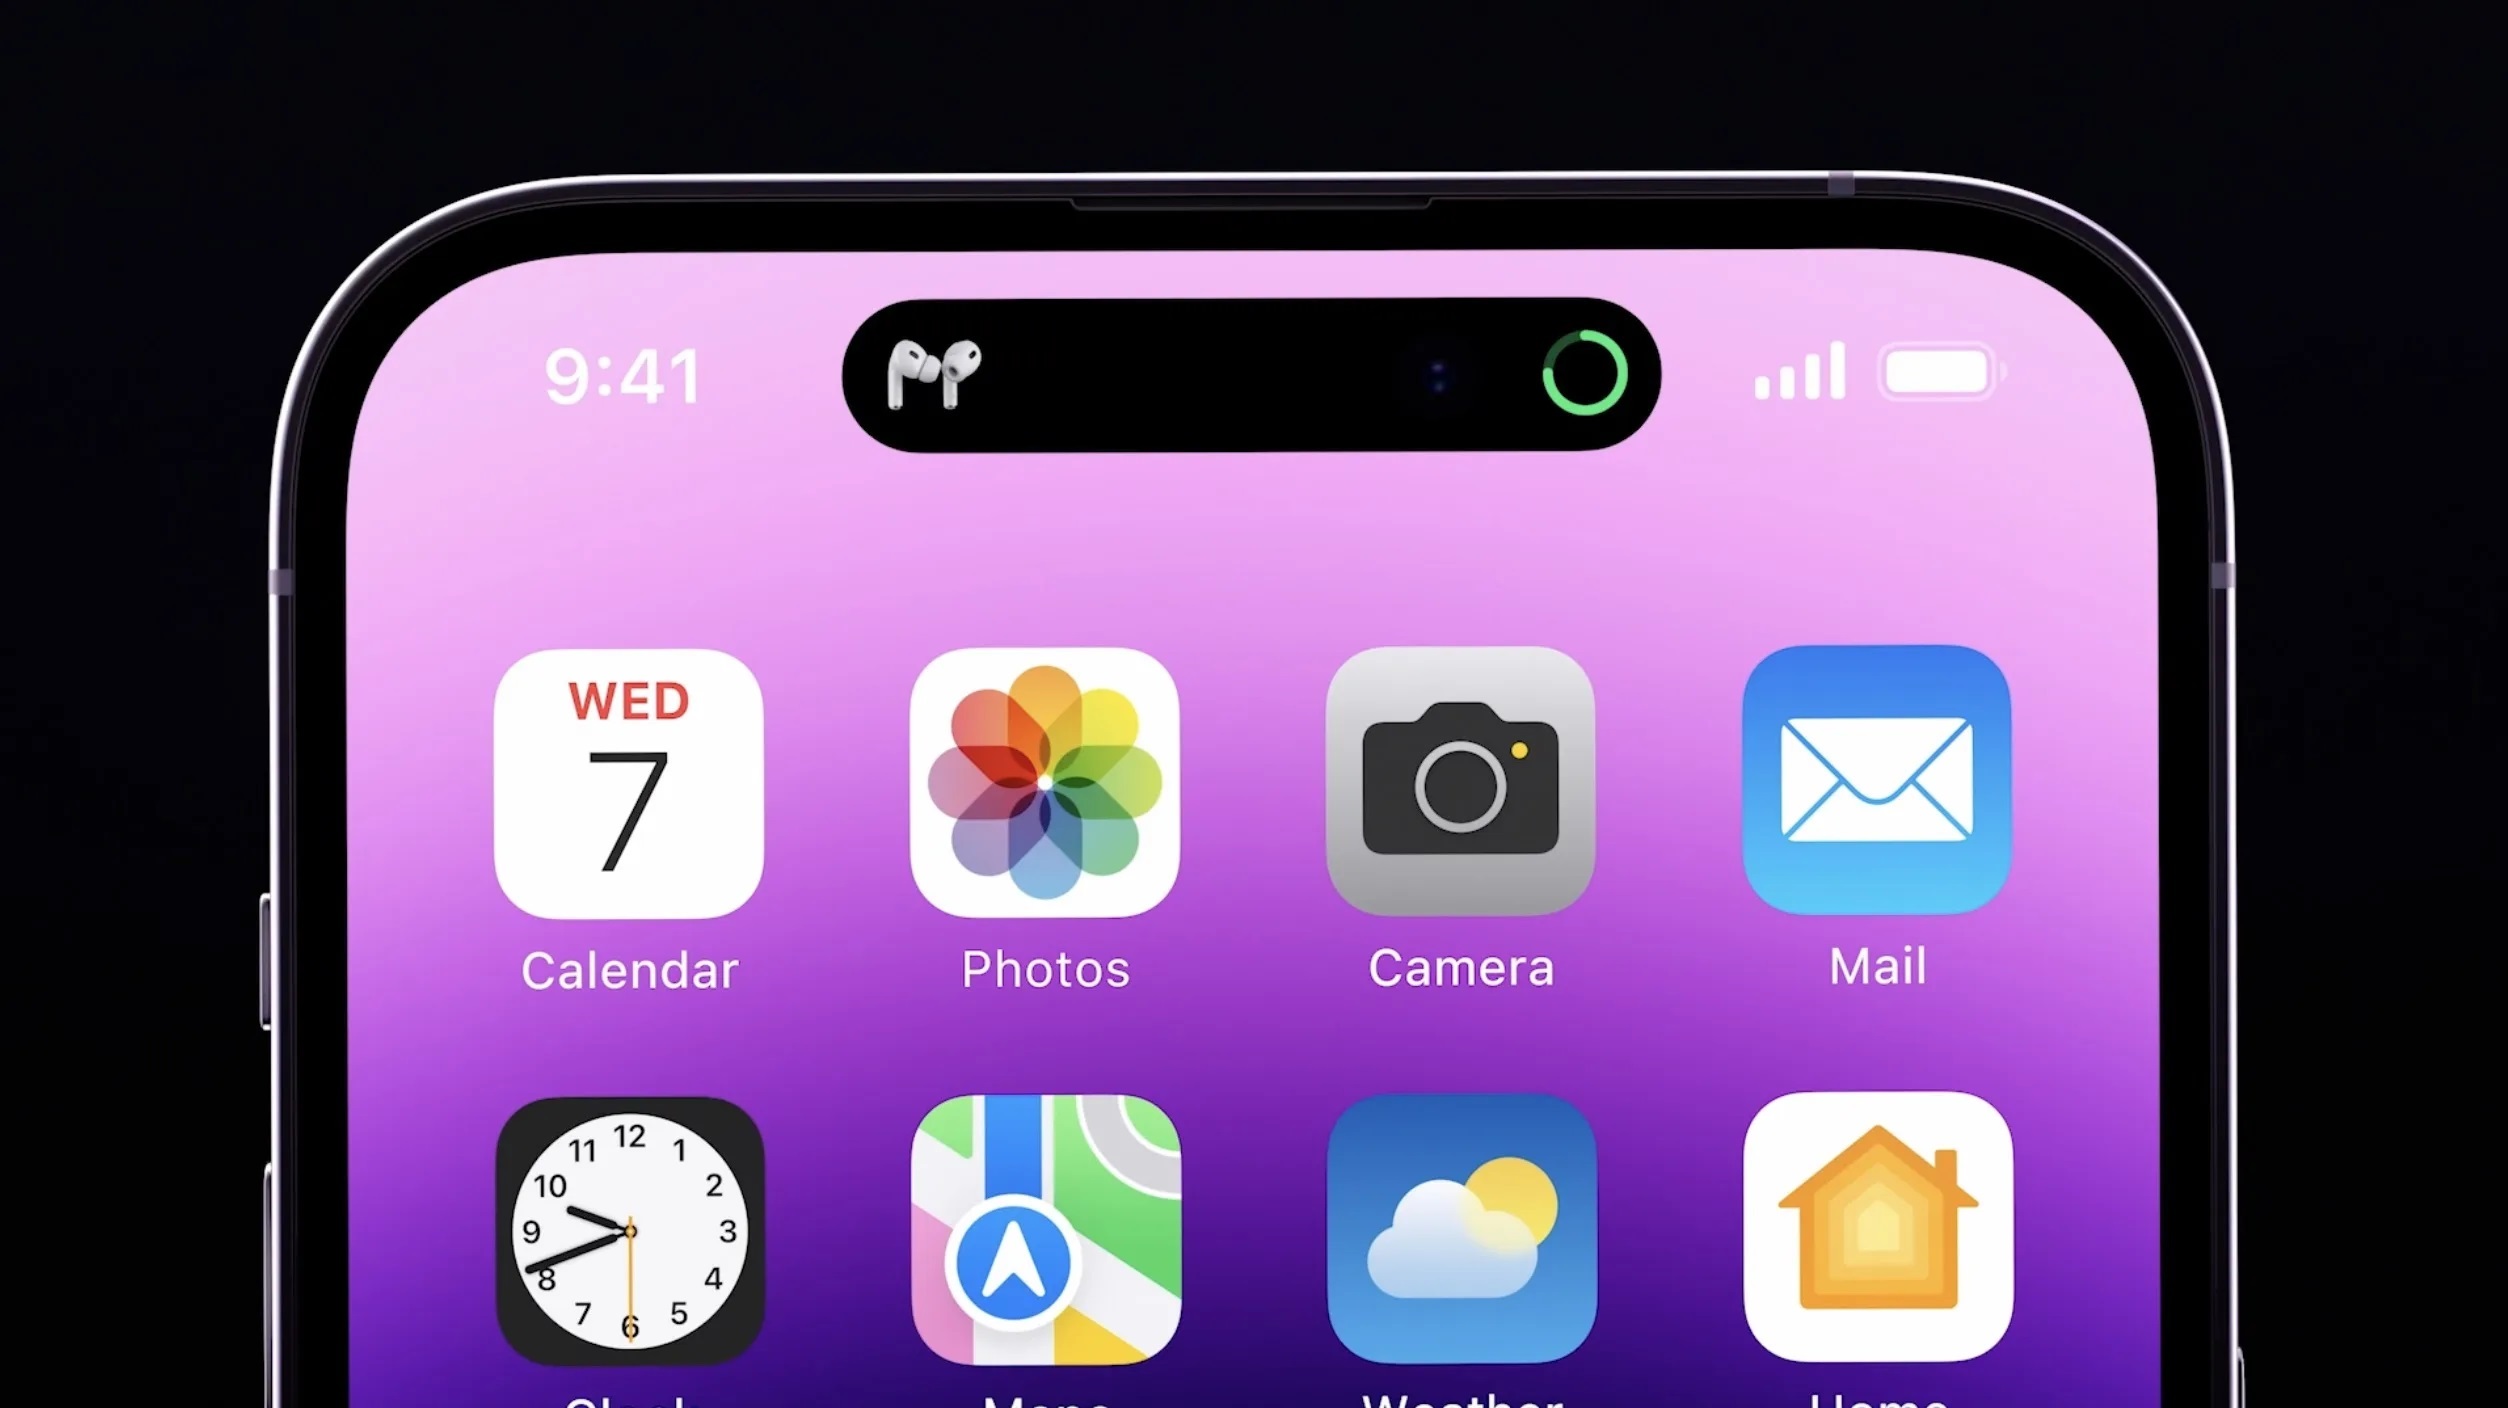 Huawei will copy one of the main features of the iPhone 14 Pro - Dynamic Island